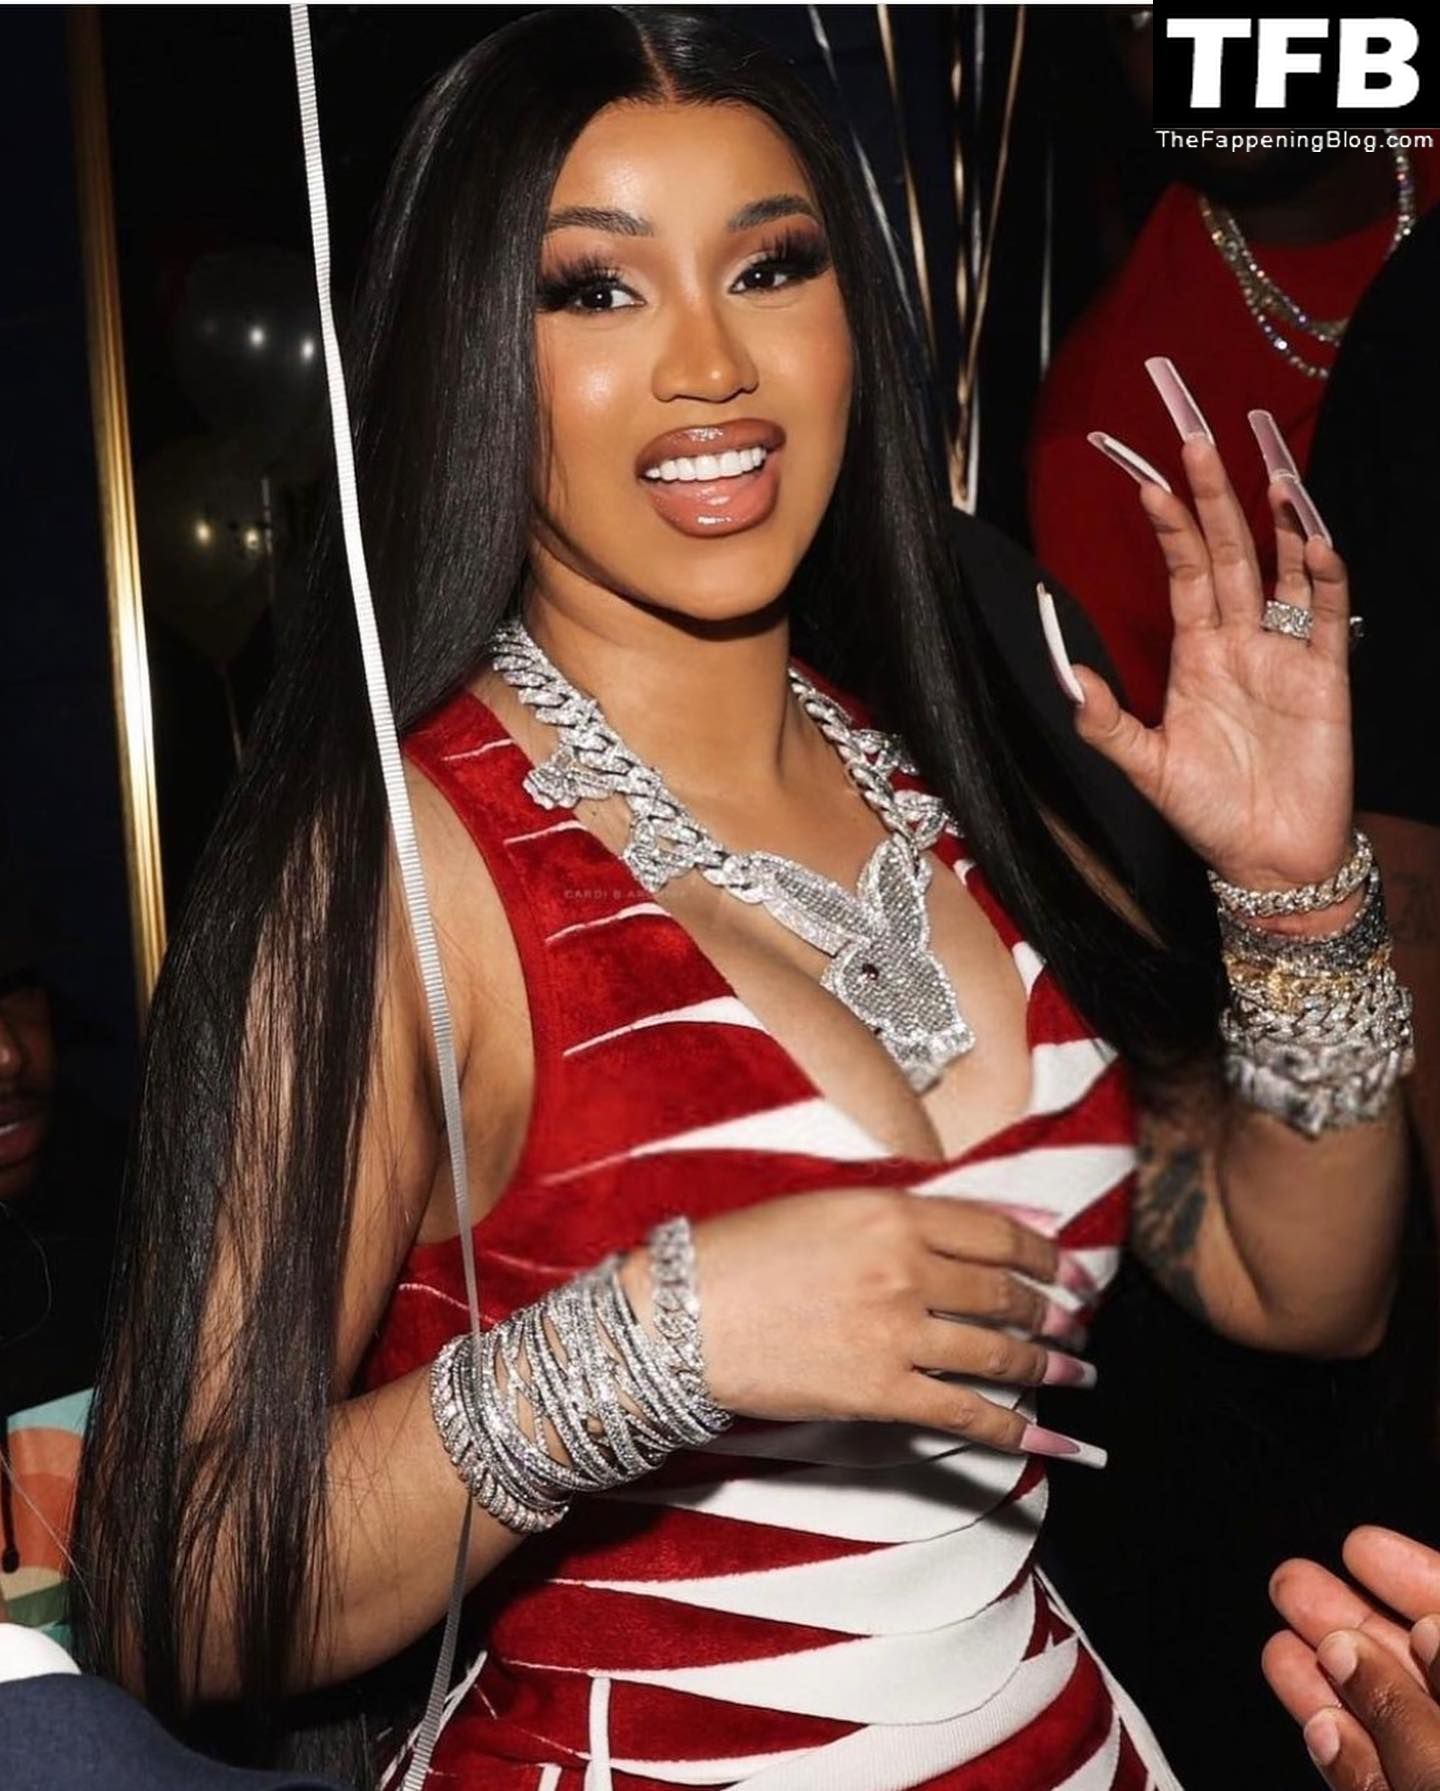 Cardi B Sexy The Fappening Blog 1 - Cardi B Flaunts Her Cleavage as She Leaves a Club with Offset in NYC (8 Photos)